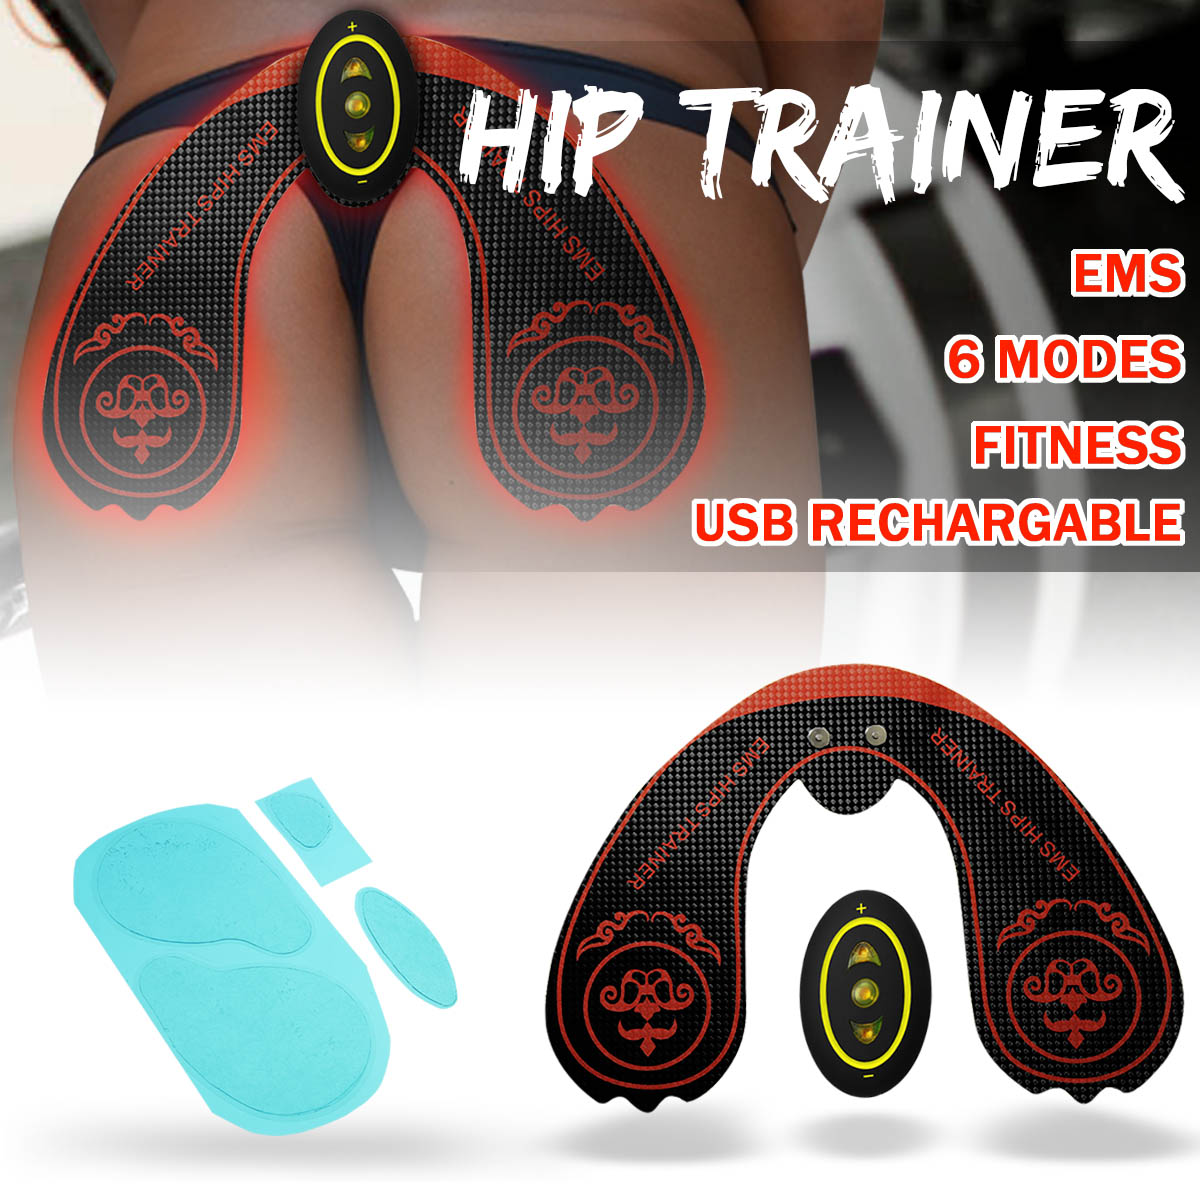 KALOAD-EMS-Waist-Hip-Trainer-USB-Charging-6-Modes-Fitness-Sports-Buttocks-Lifting-Muscle-Training-St-1410527